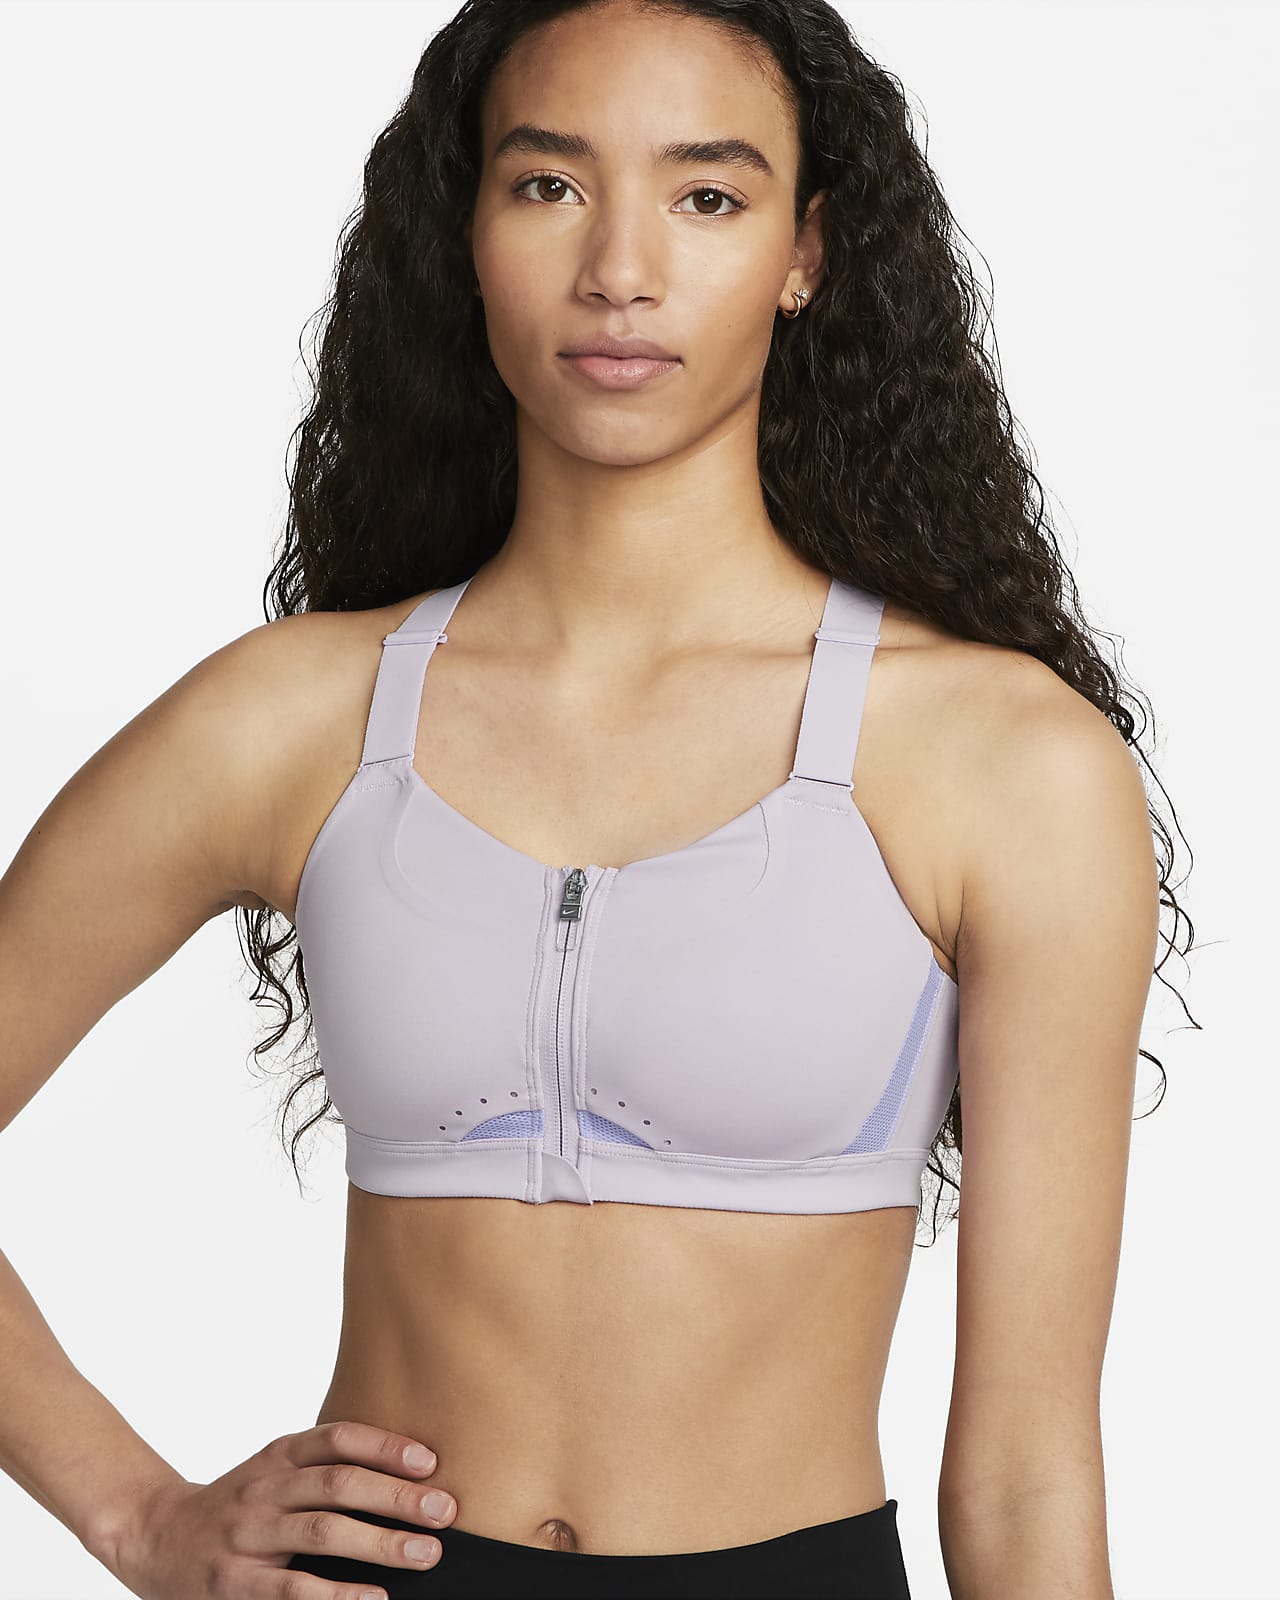 Nike Alpha Women's High-Support Padded Zip-Front Sports Bra